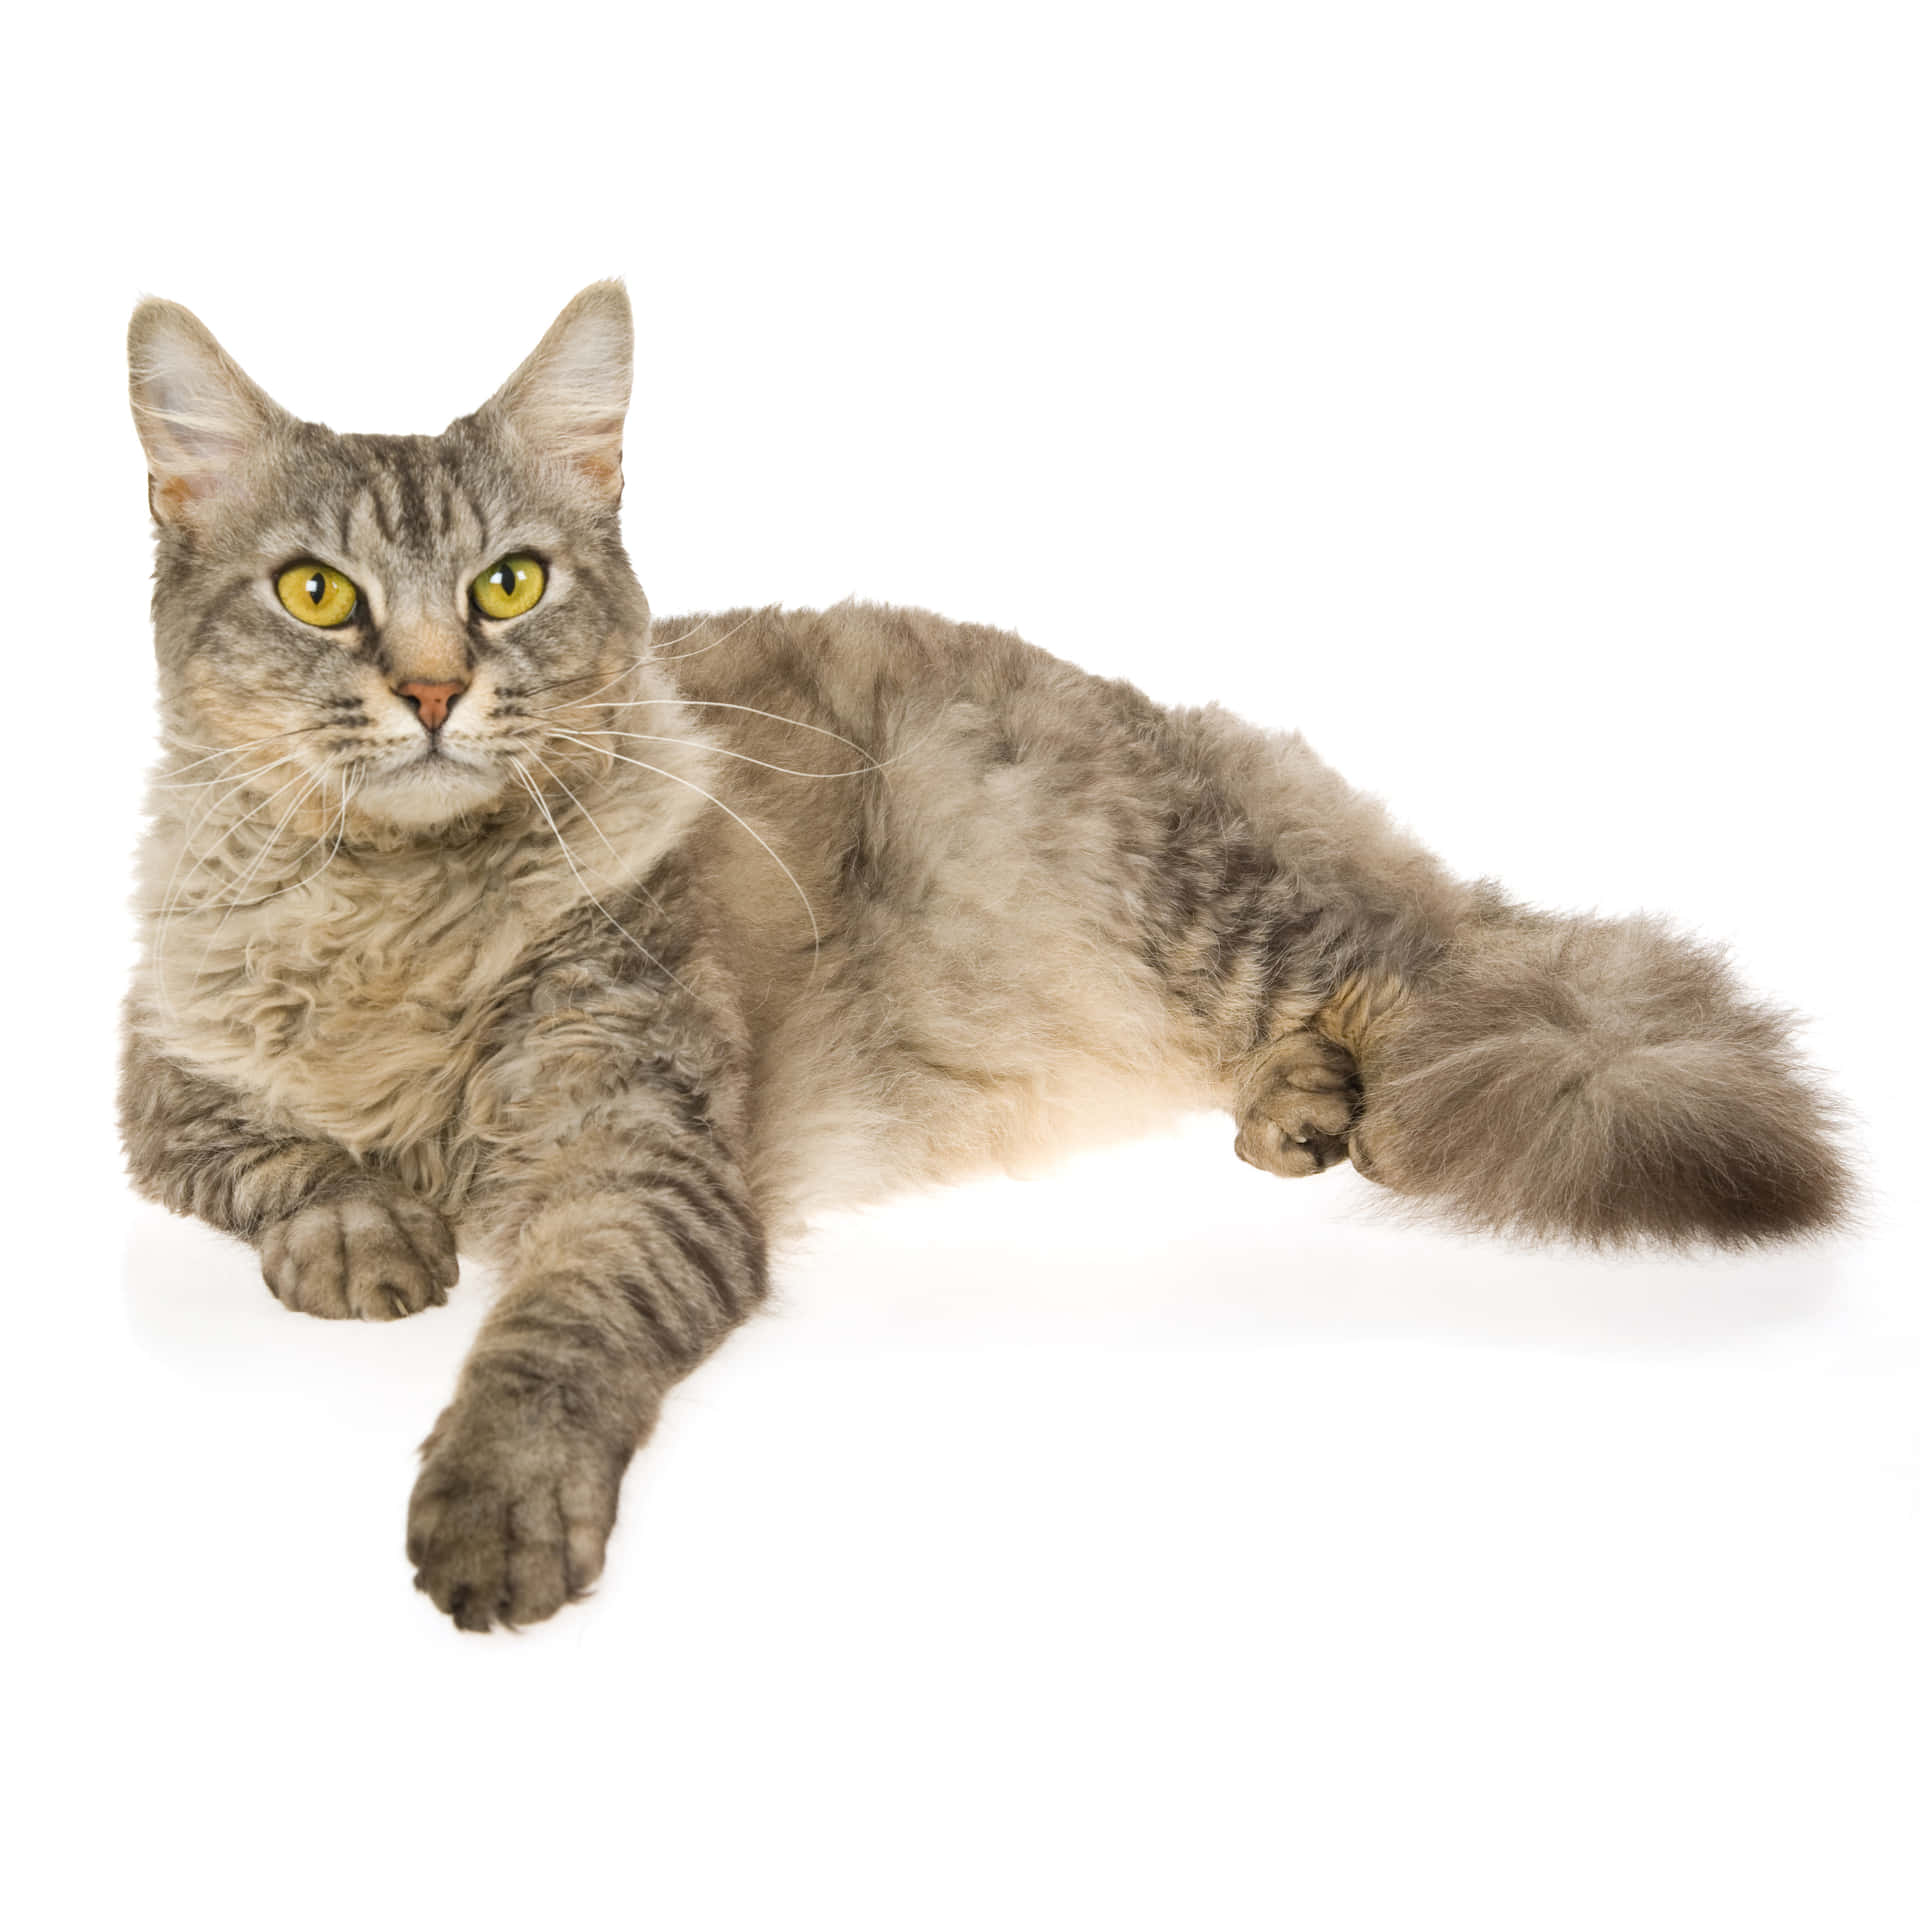 A Laperm cat with a curly coat relaxing on a cozy surface Wallpaper